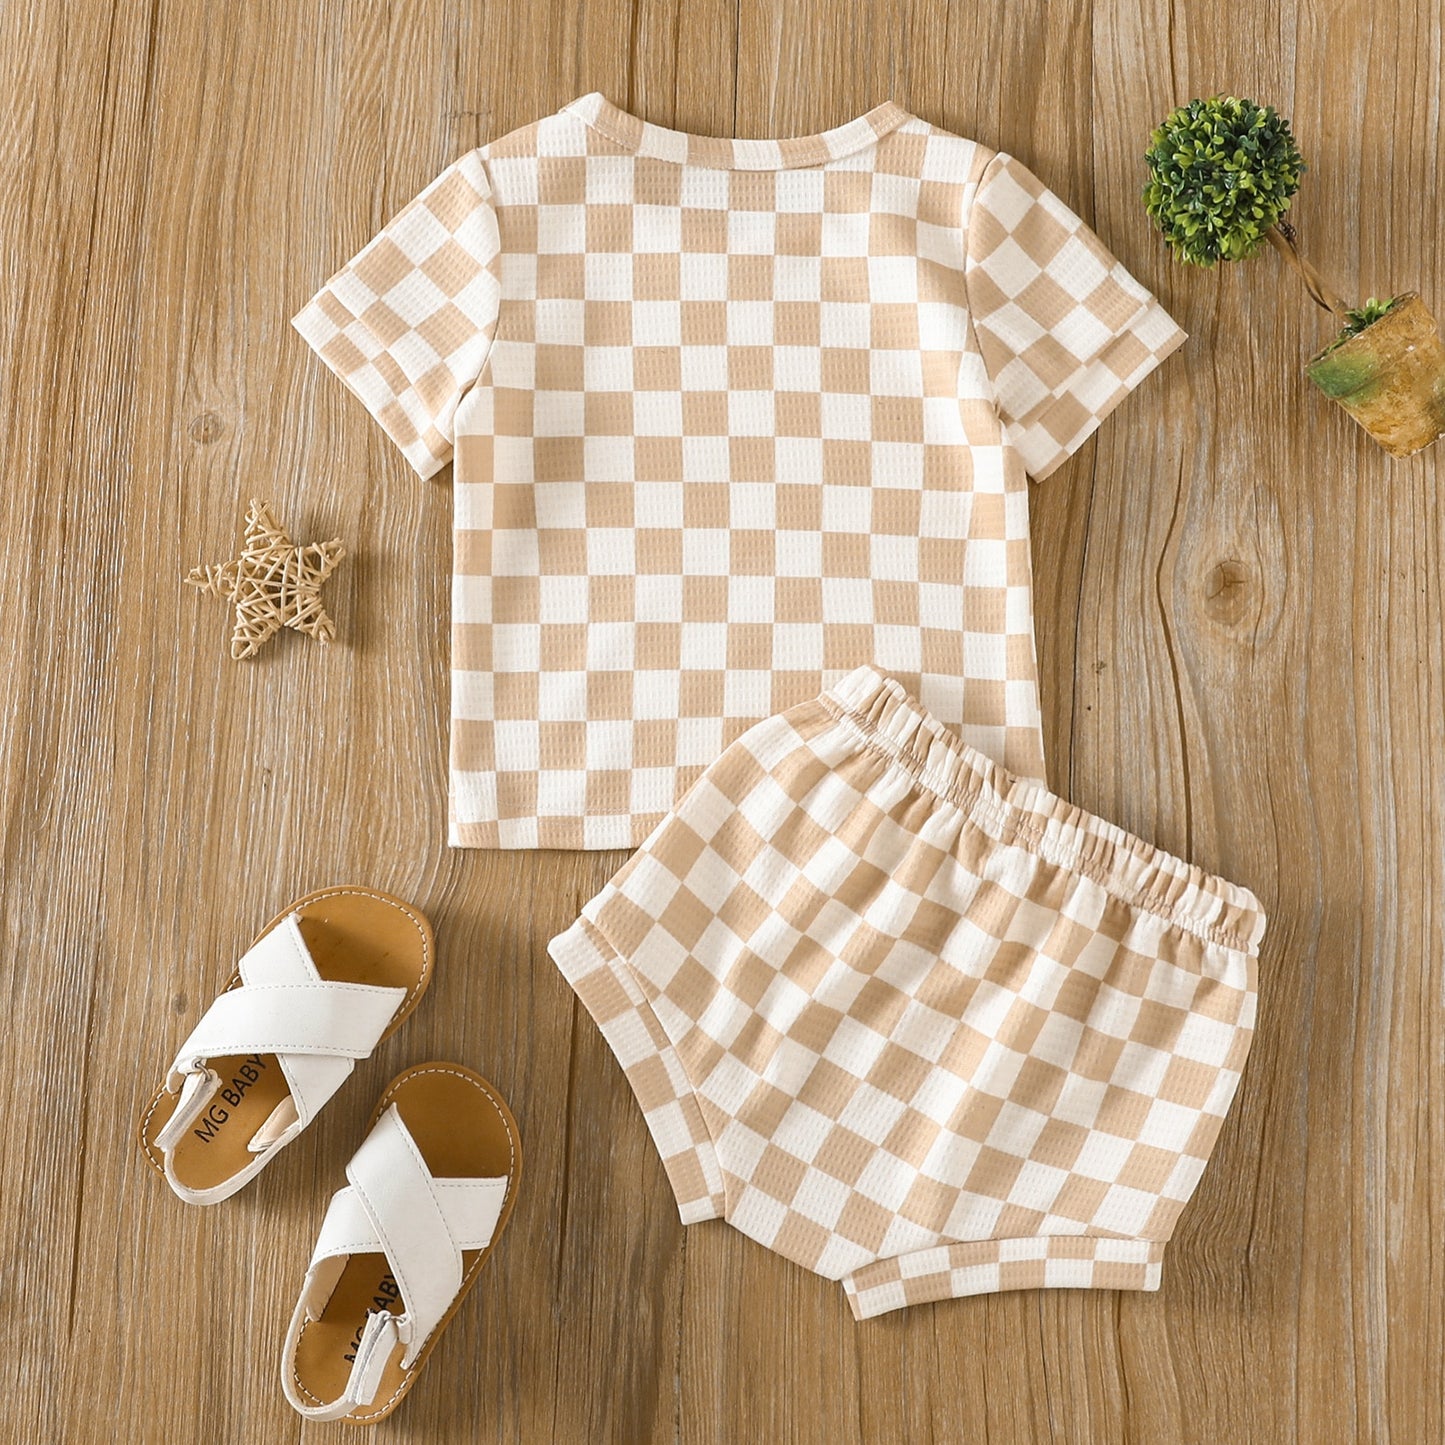 Baby Plaid Summer Outfit